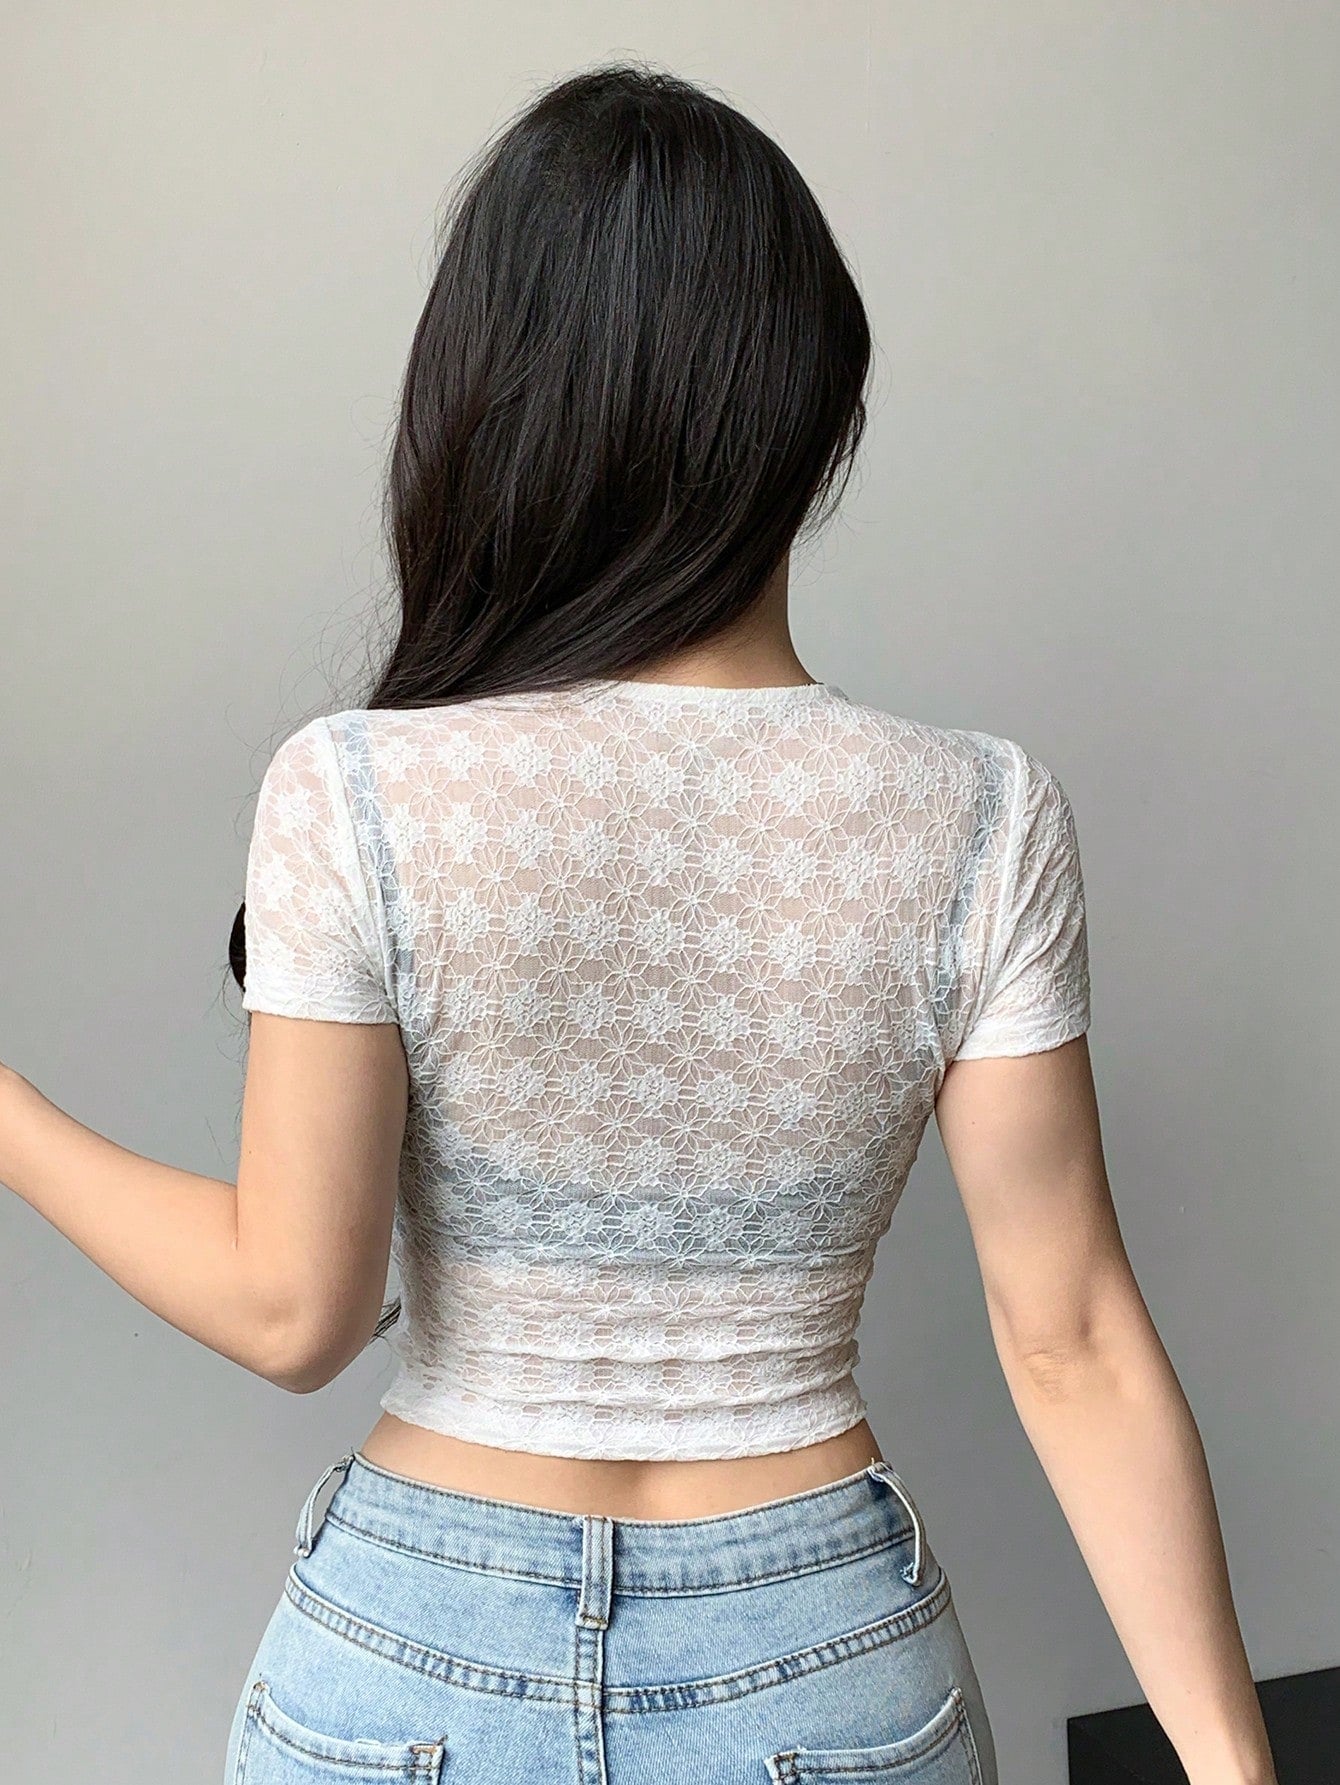 Women V-Neck Short Sleeve Crop Top With A See-Through Lace Design For A Fashionable Look In Summer